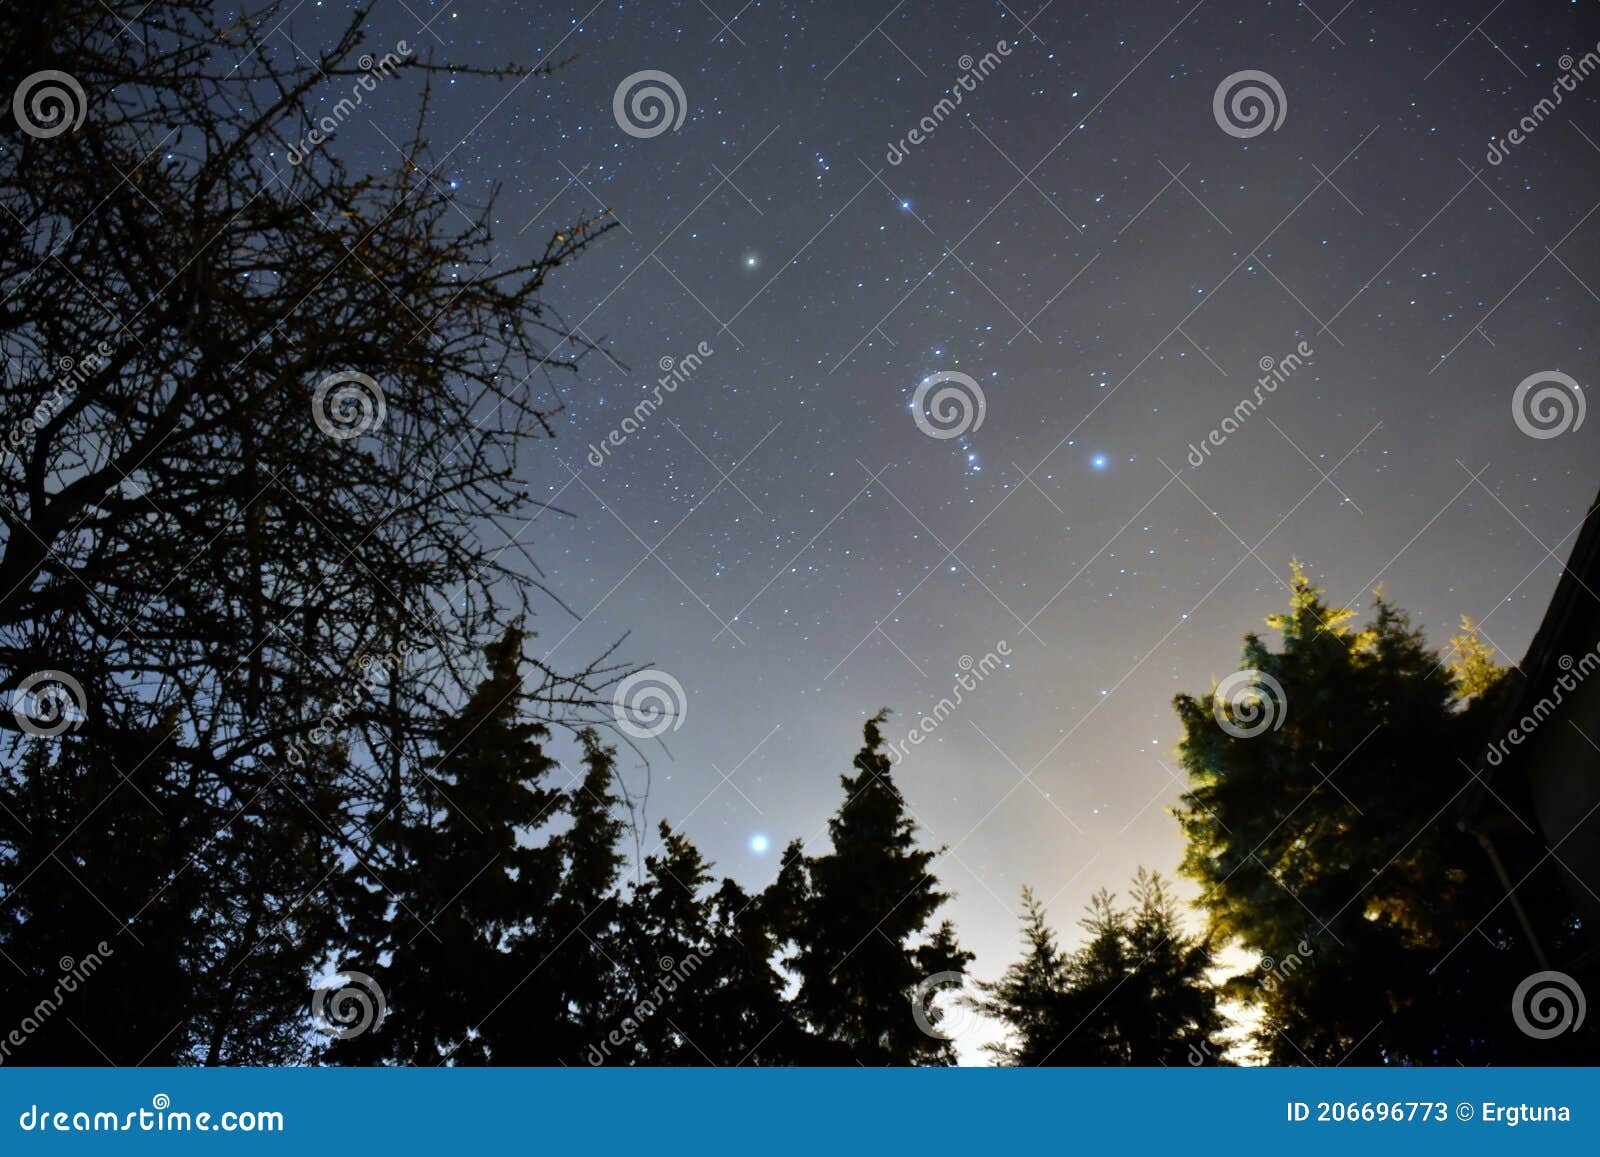 the constellation of orion and the trees